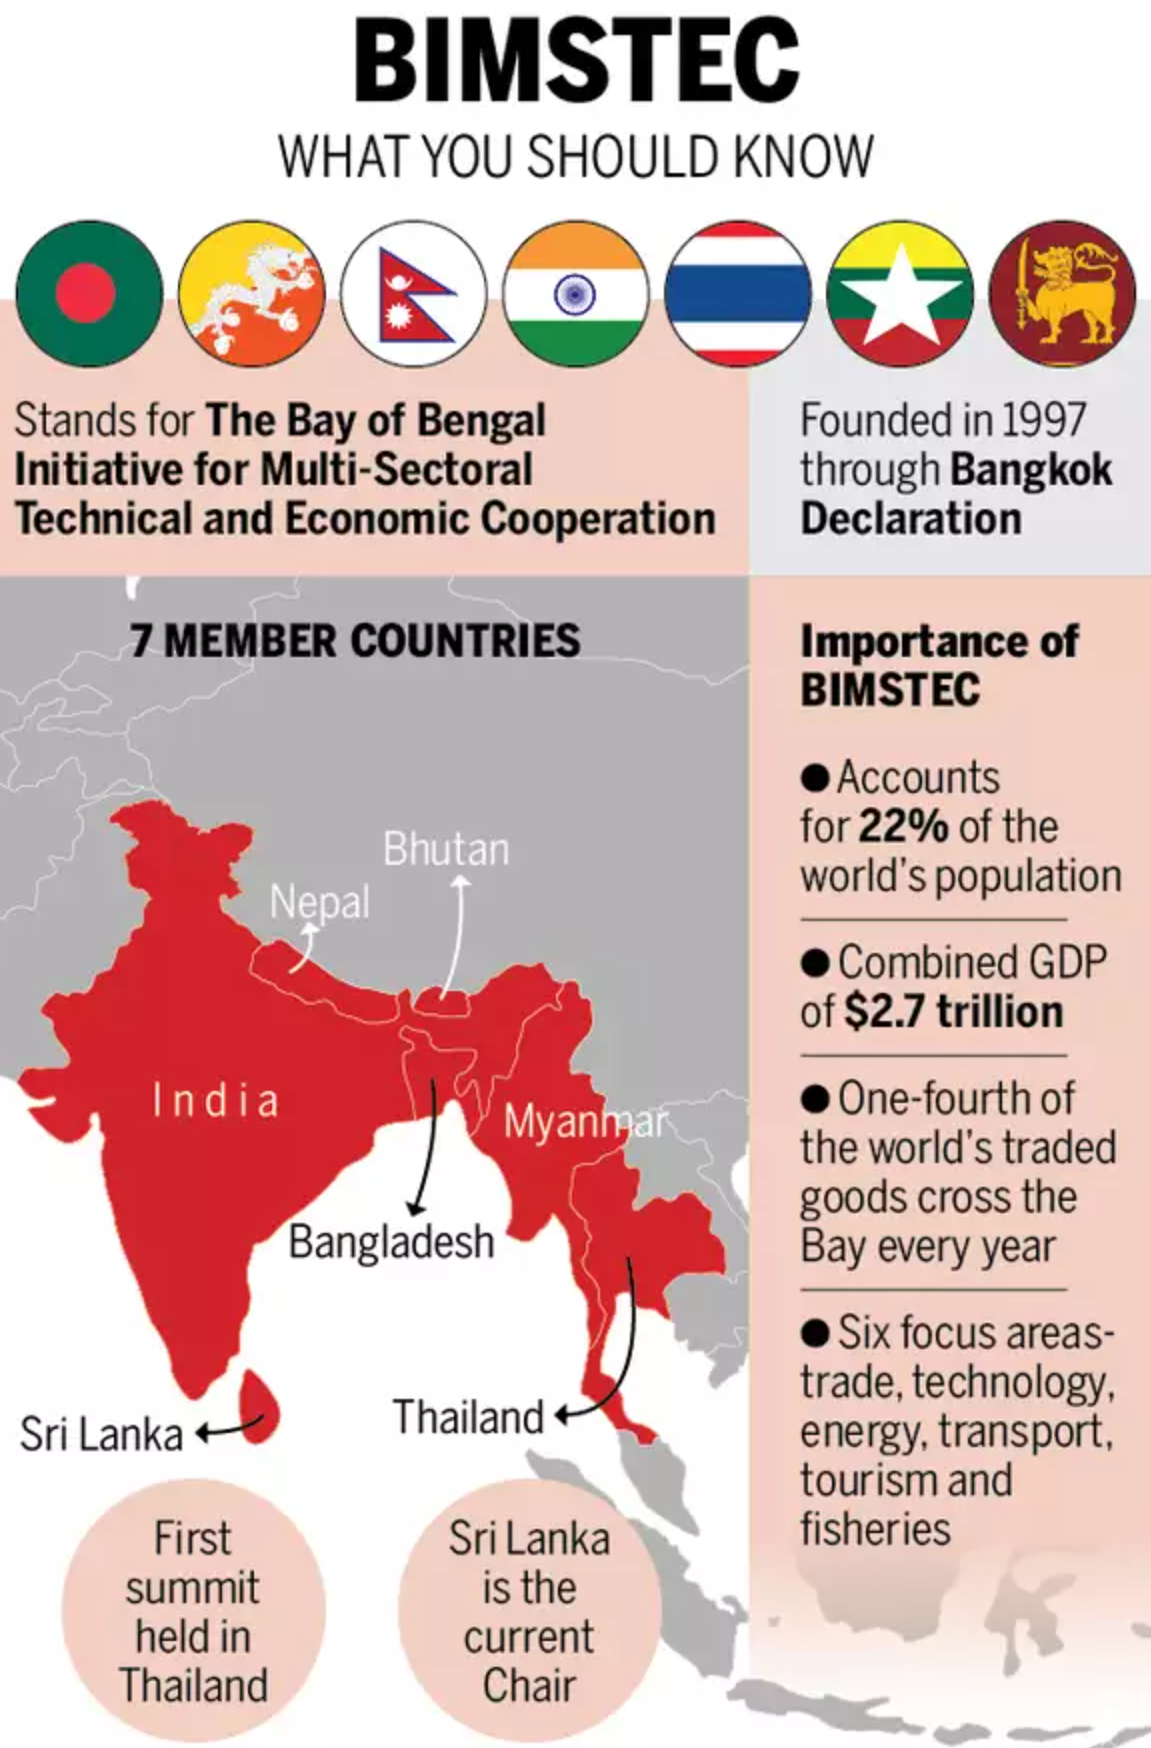 BIMSTEC Countries and Important Facts 